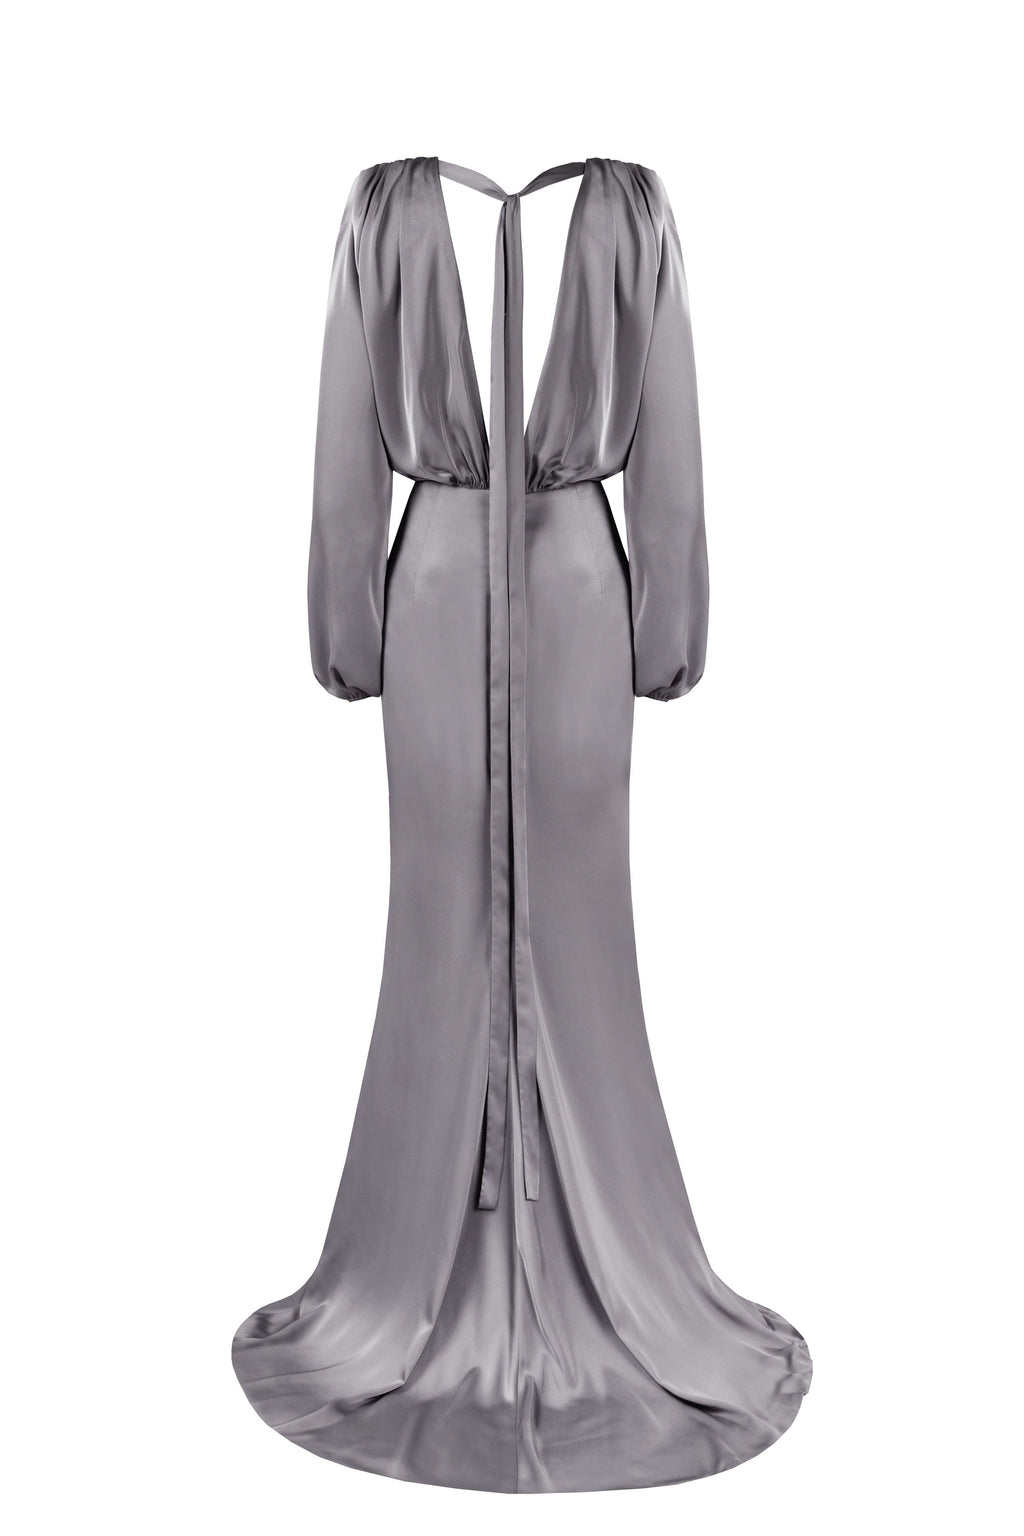 Silver Dresses ➤ Milla Dresses - USA, Worldwide delivery